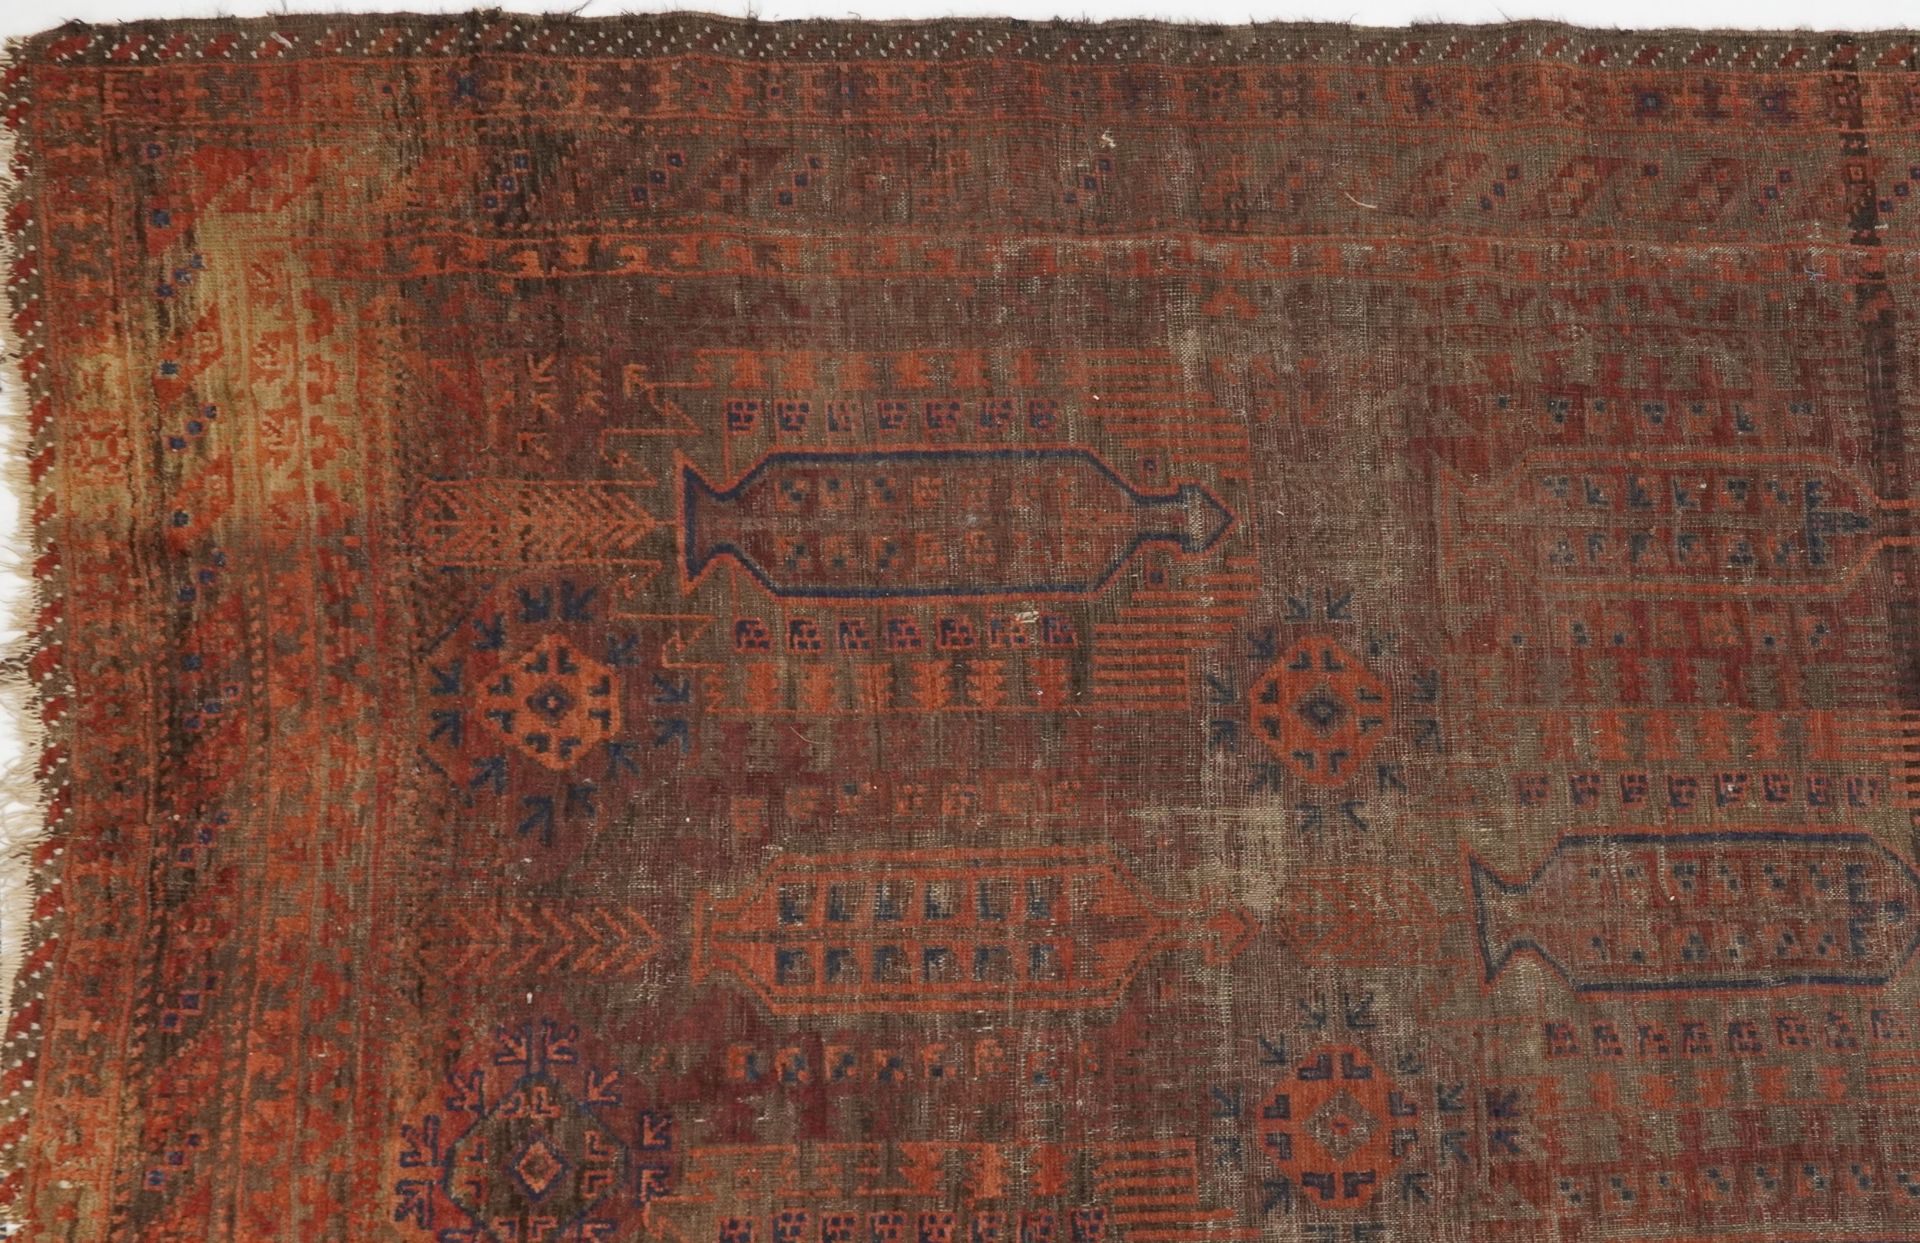 Antique Turkish carpet having an all over blue and red geometric design , 290cm x 206cm - Image 2 of 7